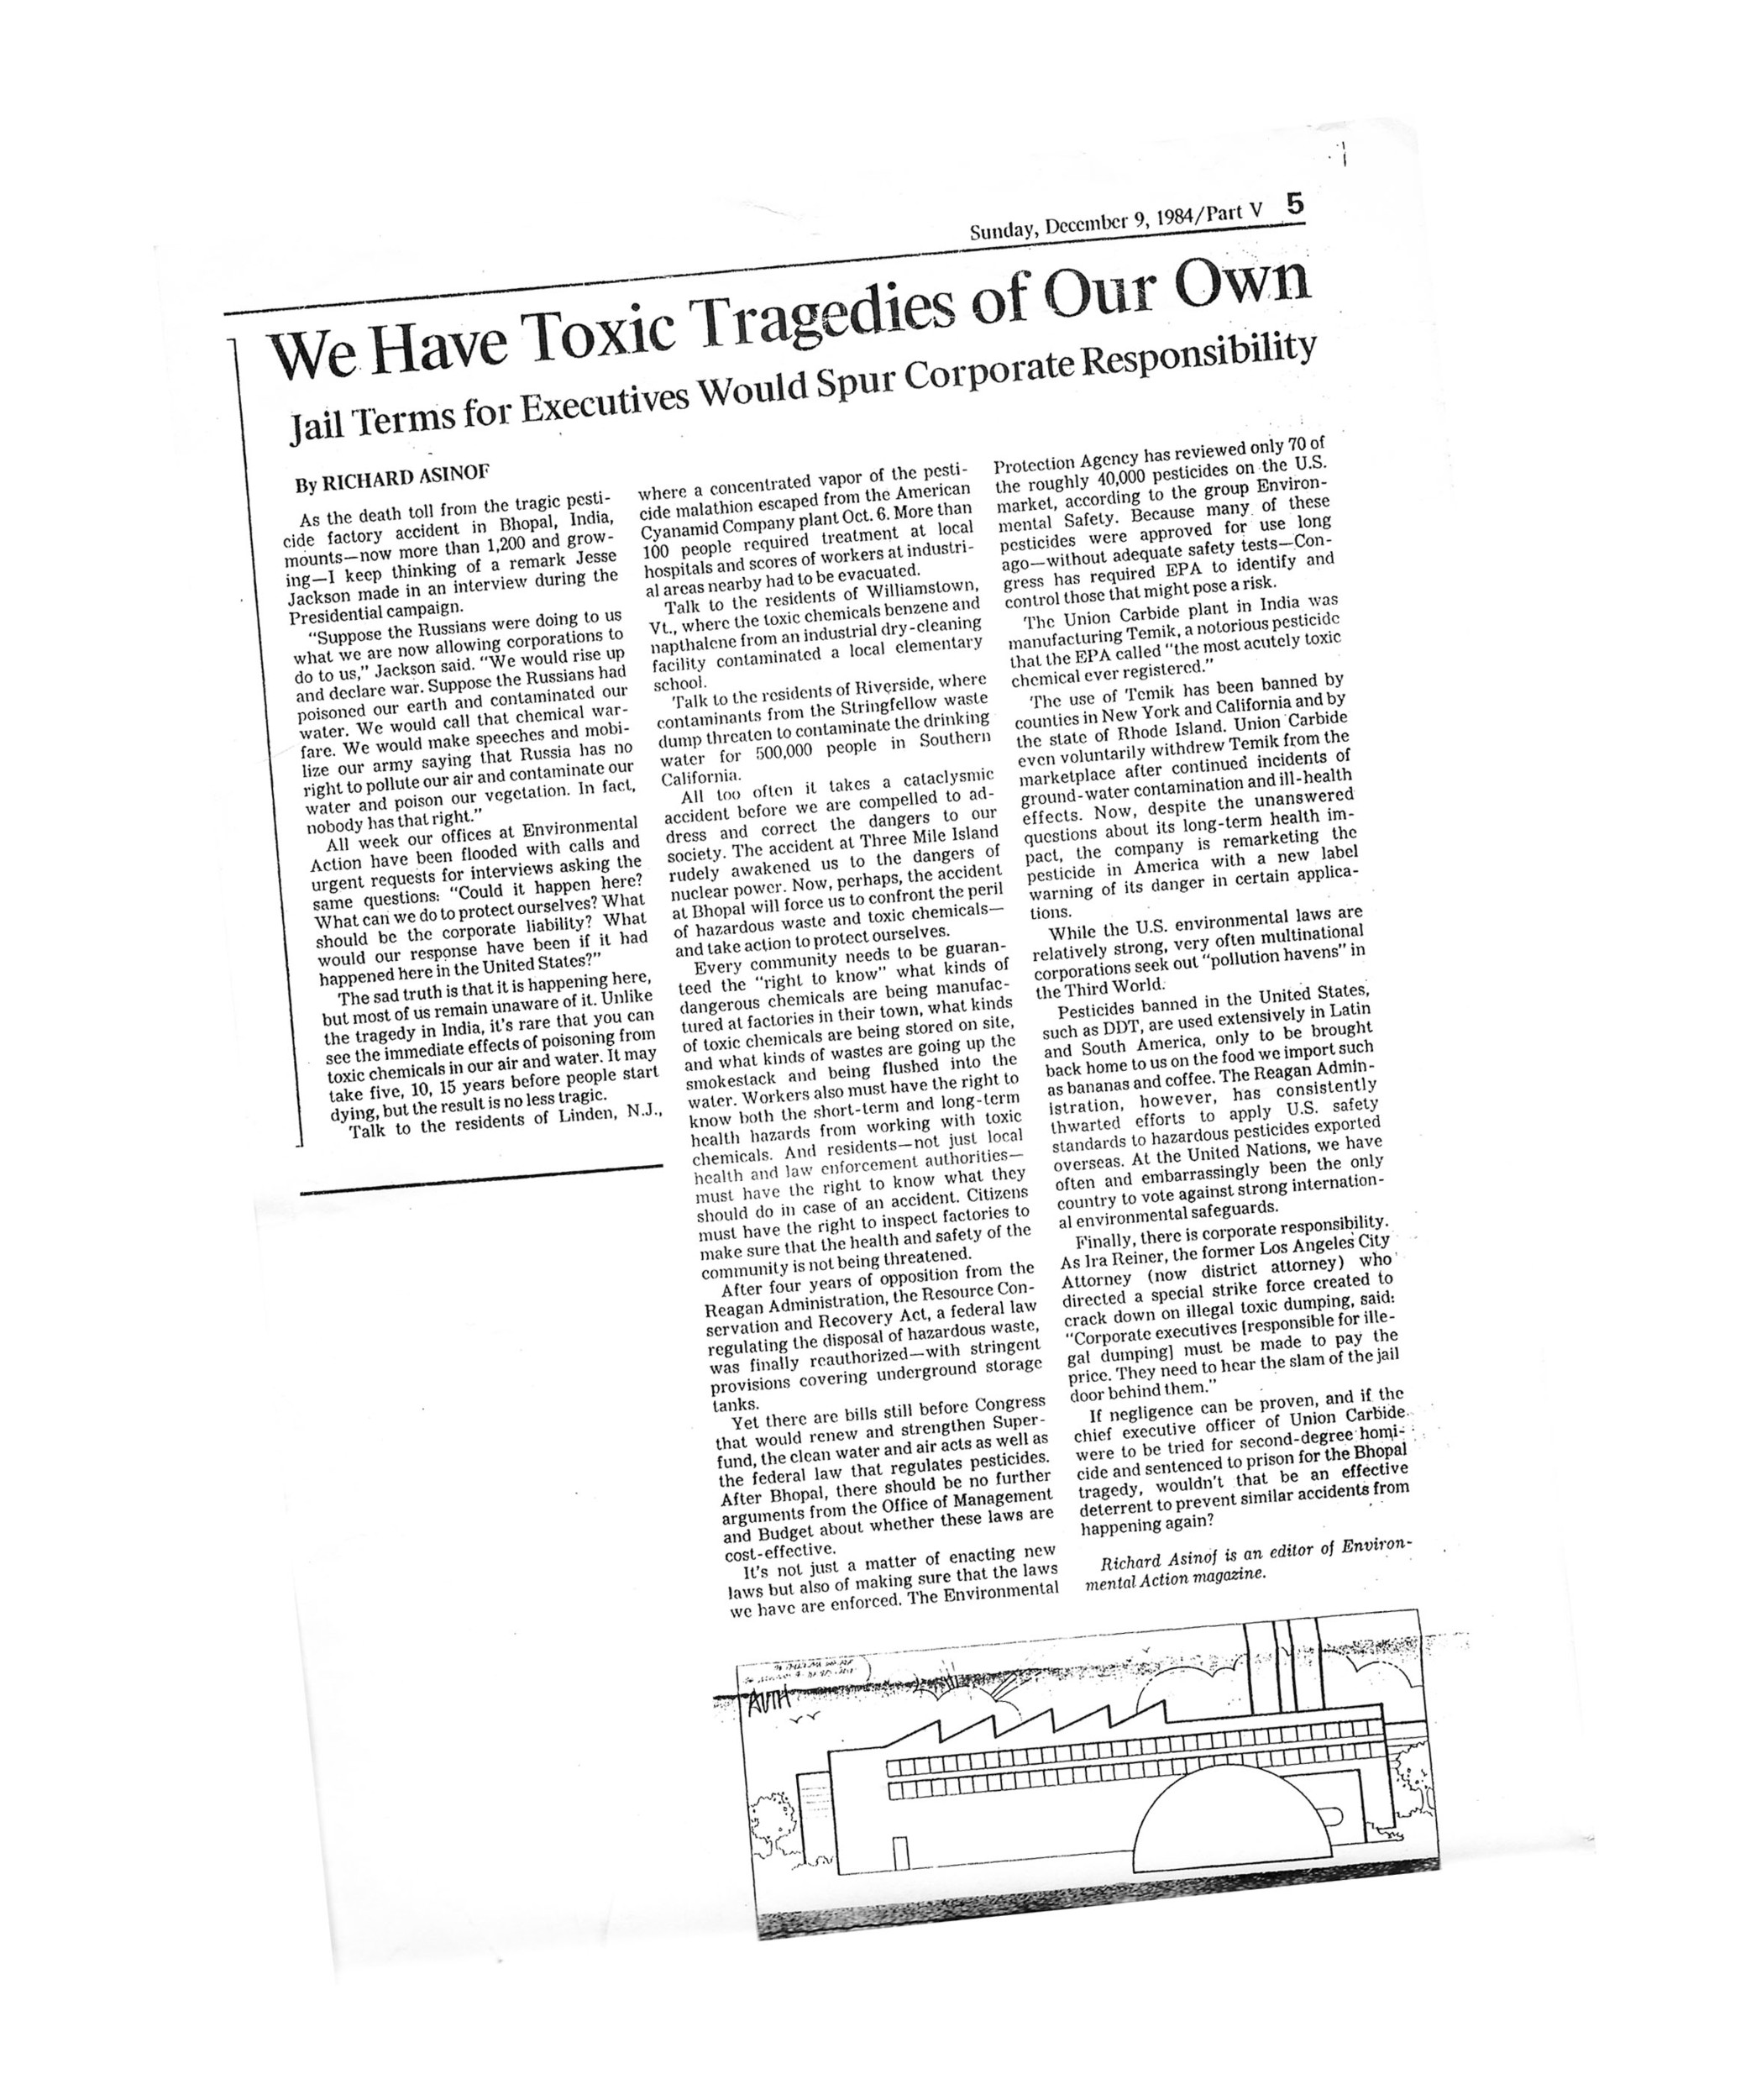 The op-ed in the Los Angeles times from December of 1984, entitled: "We Have Toxic Tragedies of Our Own."